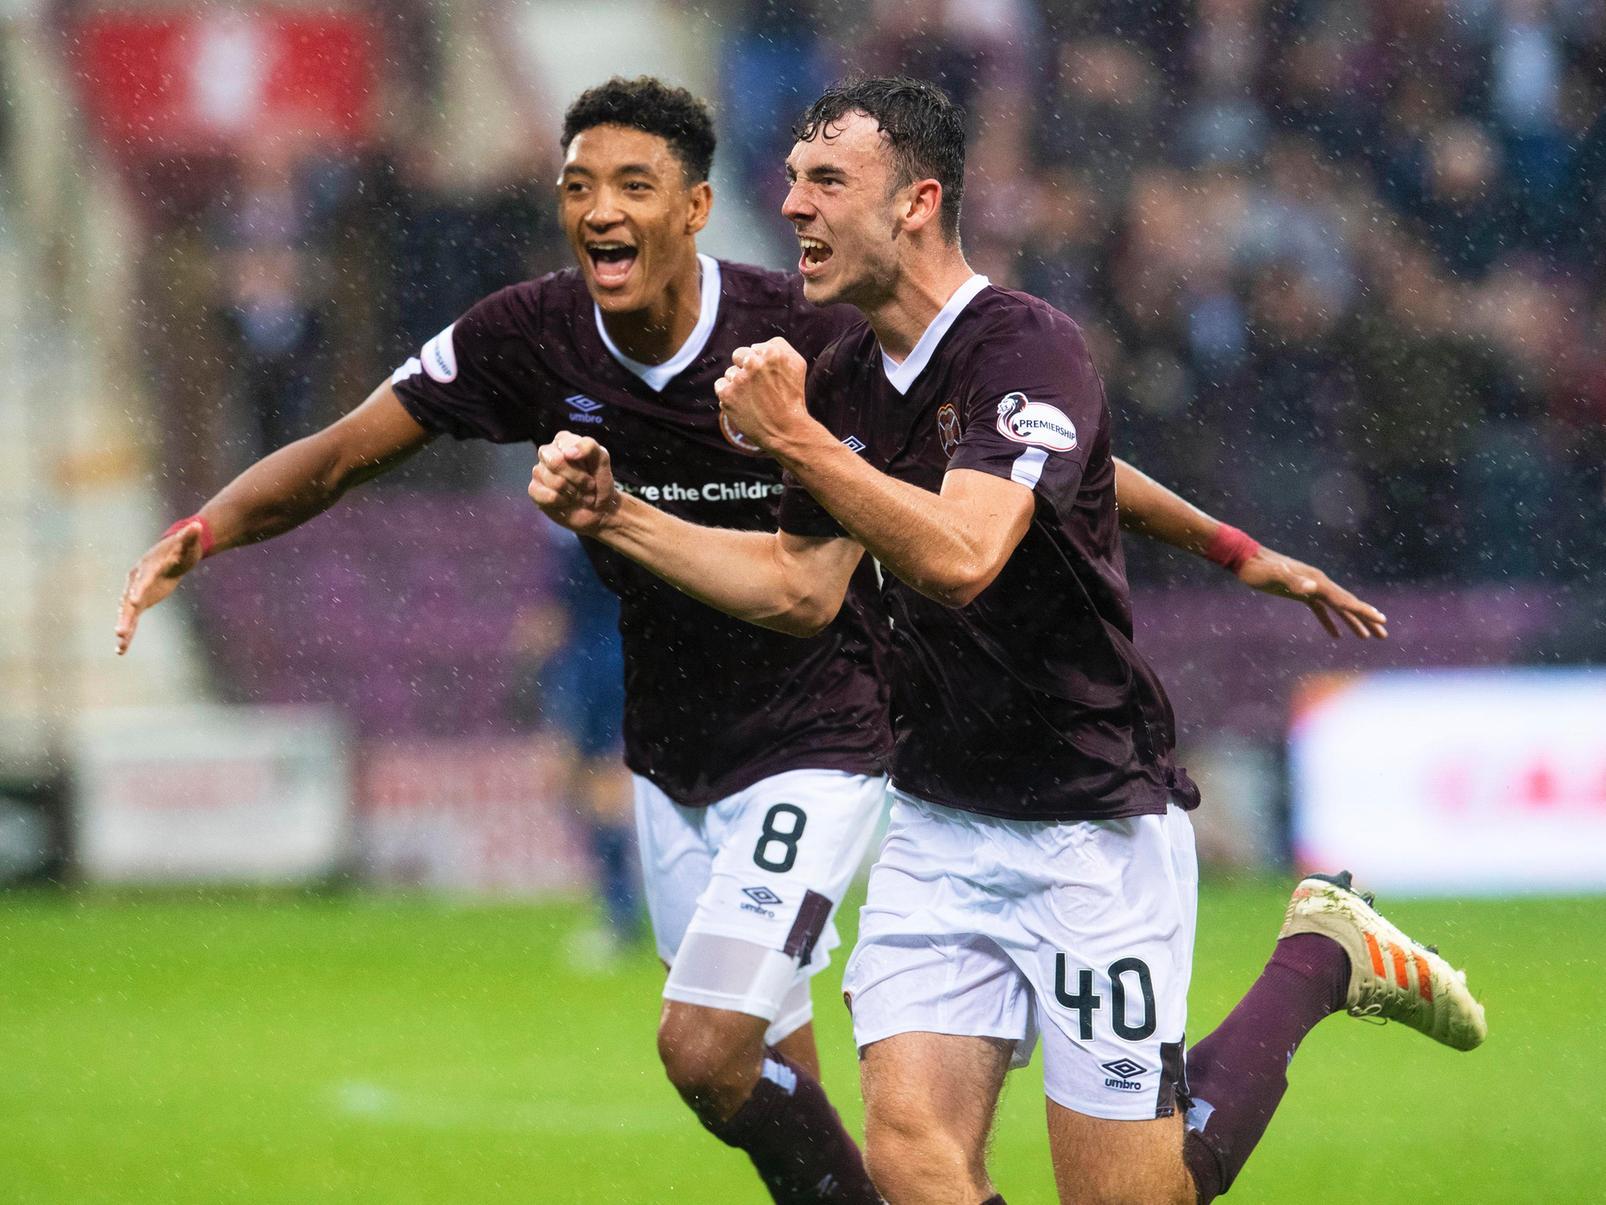 The one player who seemed capable of probing the County defence in the first half, helping Hearts transition with neat one-twos to take opponents out of the game. Influence waned after the break.